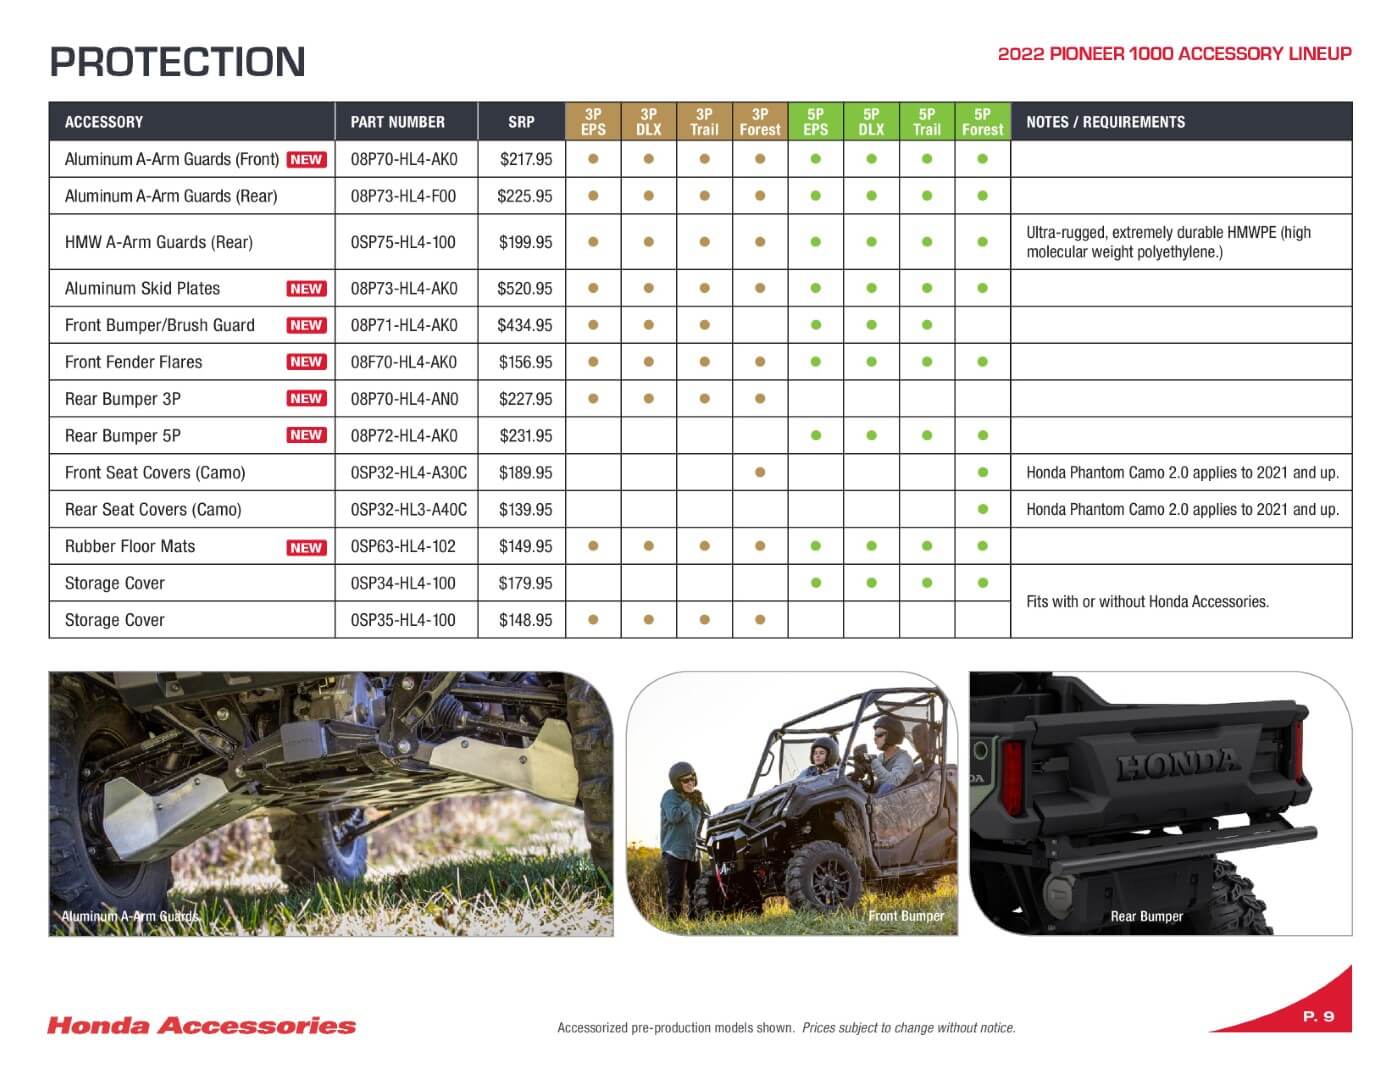 2022 Honda Pioneer 1000 Accessory Catalog / Accessories | Page 9 (including Pioneer 1000-5 Accessories)